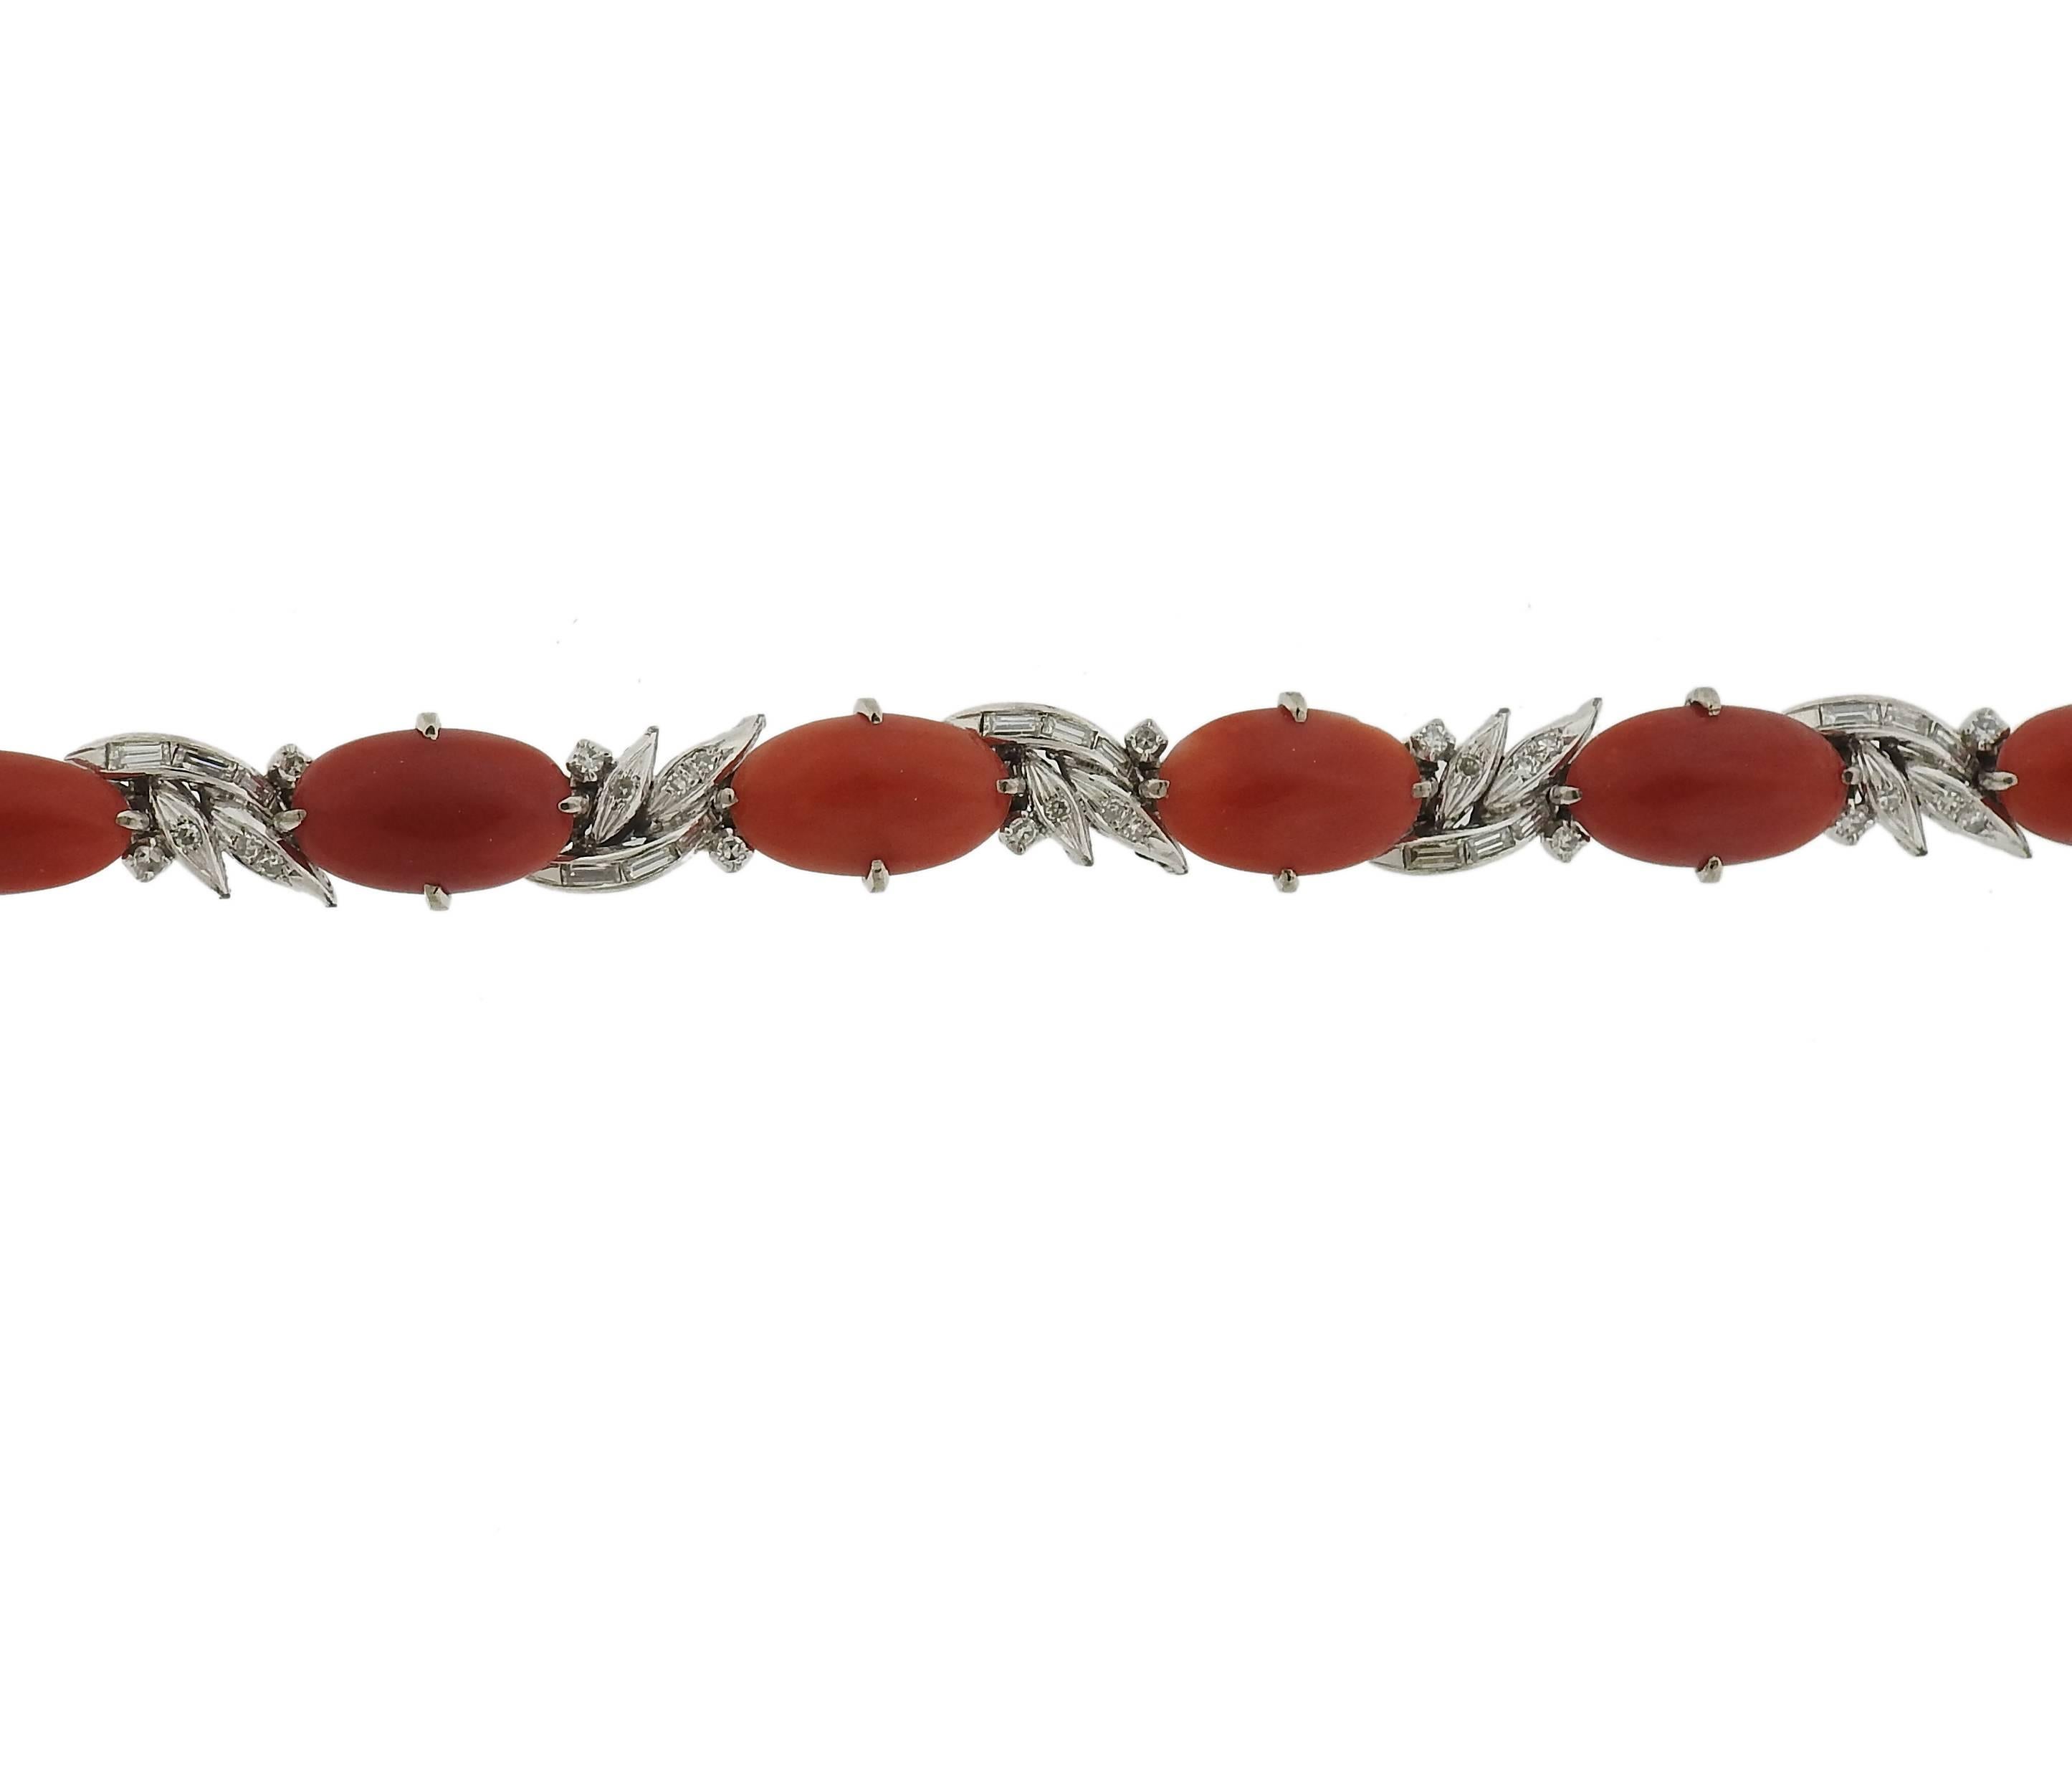 14k white gold bracelet, set with coral stones, surrounded with approximately 0.80ctw in diamonds. Bracelet is 6 1/2